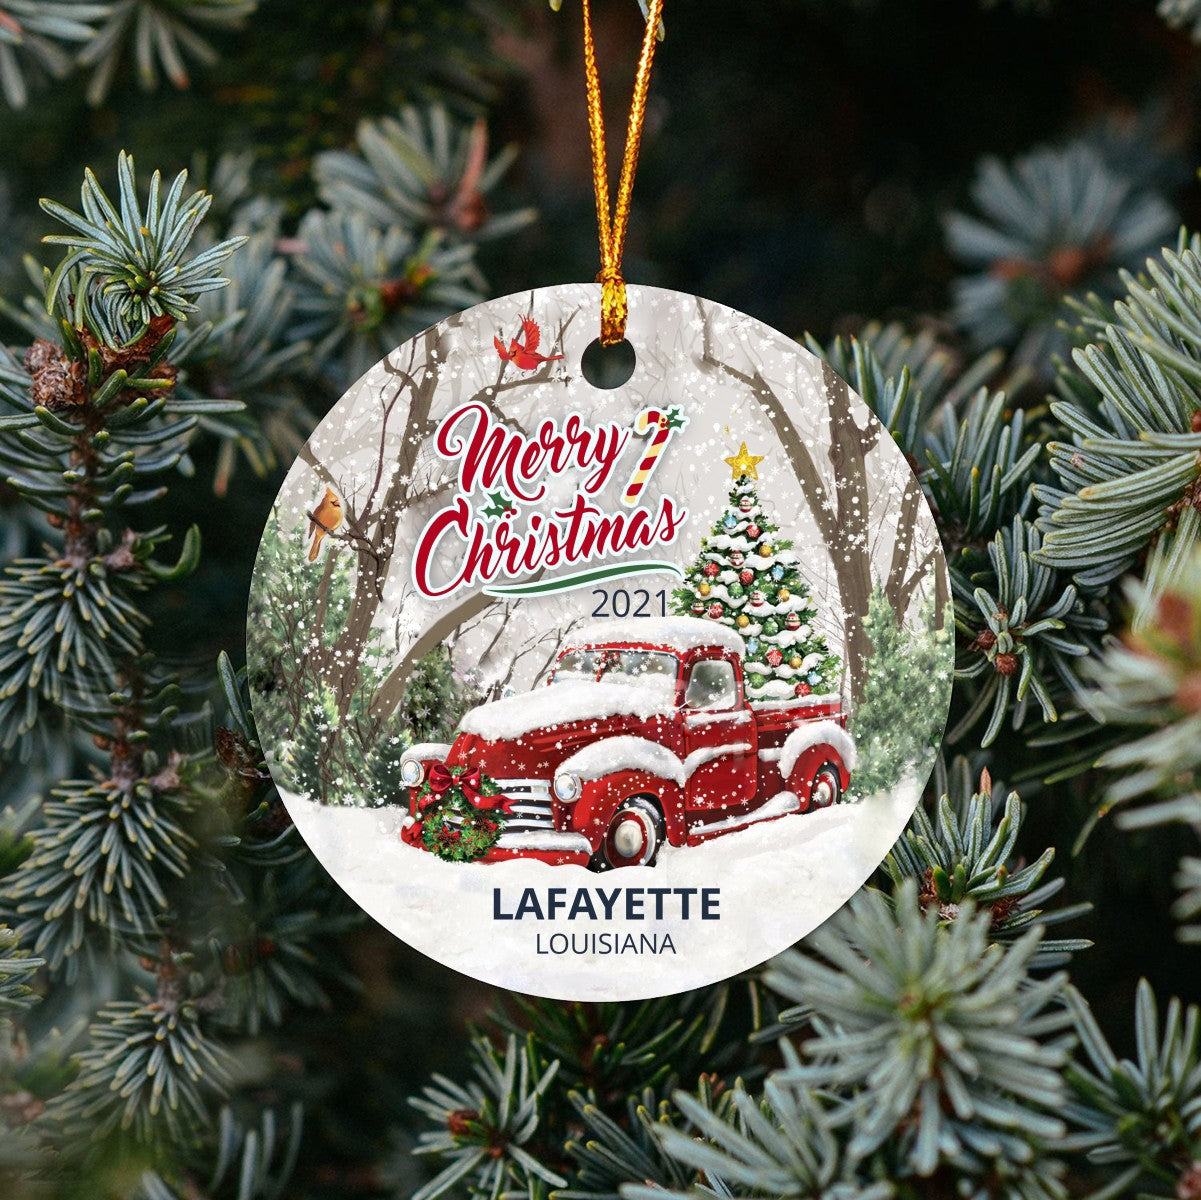 Christmas Tree Ornaments Lafayette - Ornament Customize With Name City And State Lafayette Louisiana LA - Red Truck Xmas Ornaments 3'' Plastic Gift For Family, Friend And Housewarming